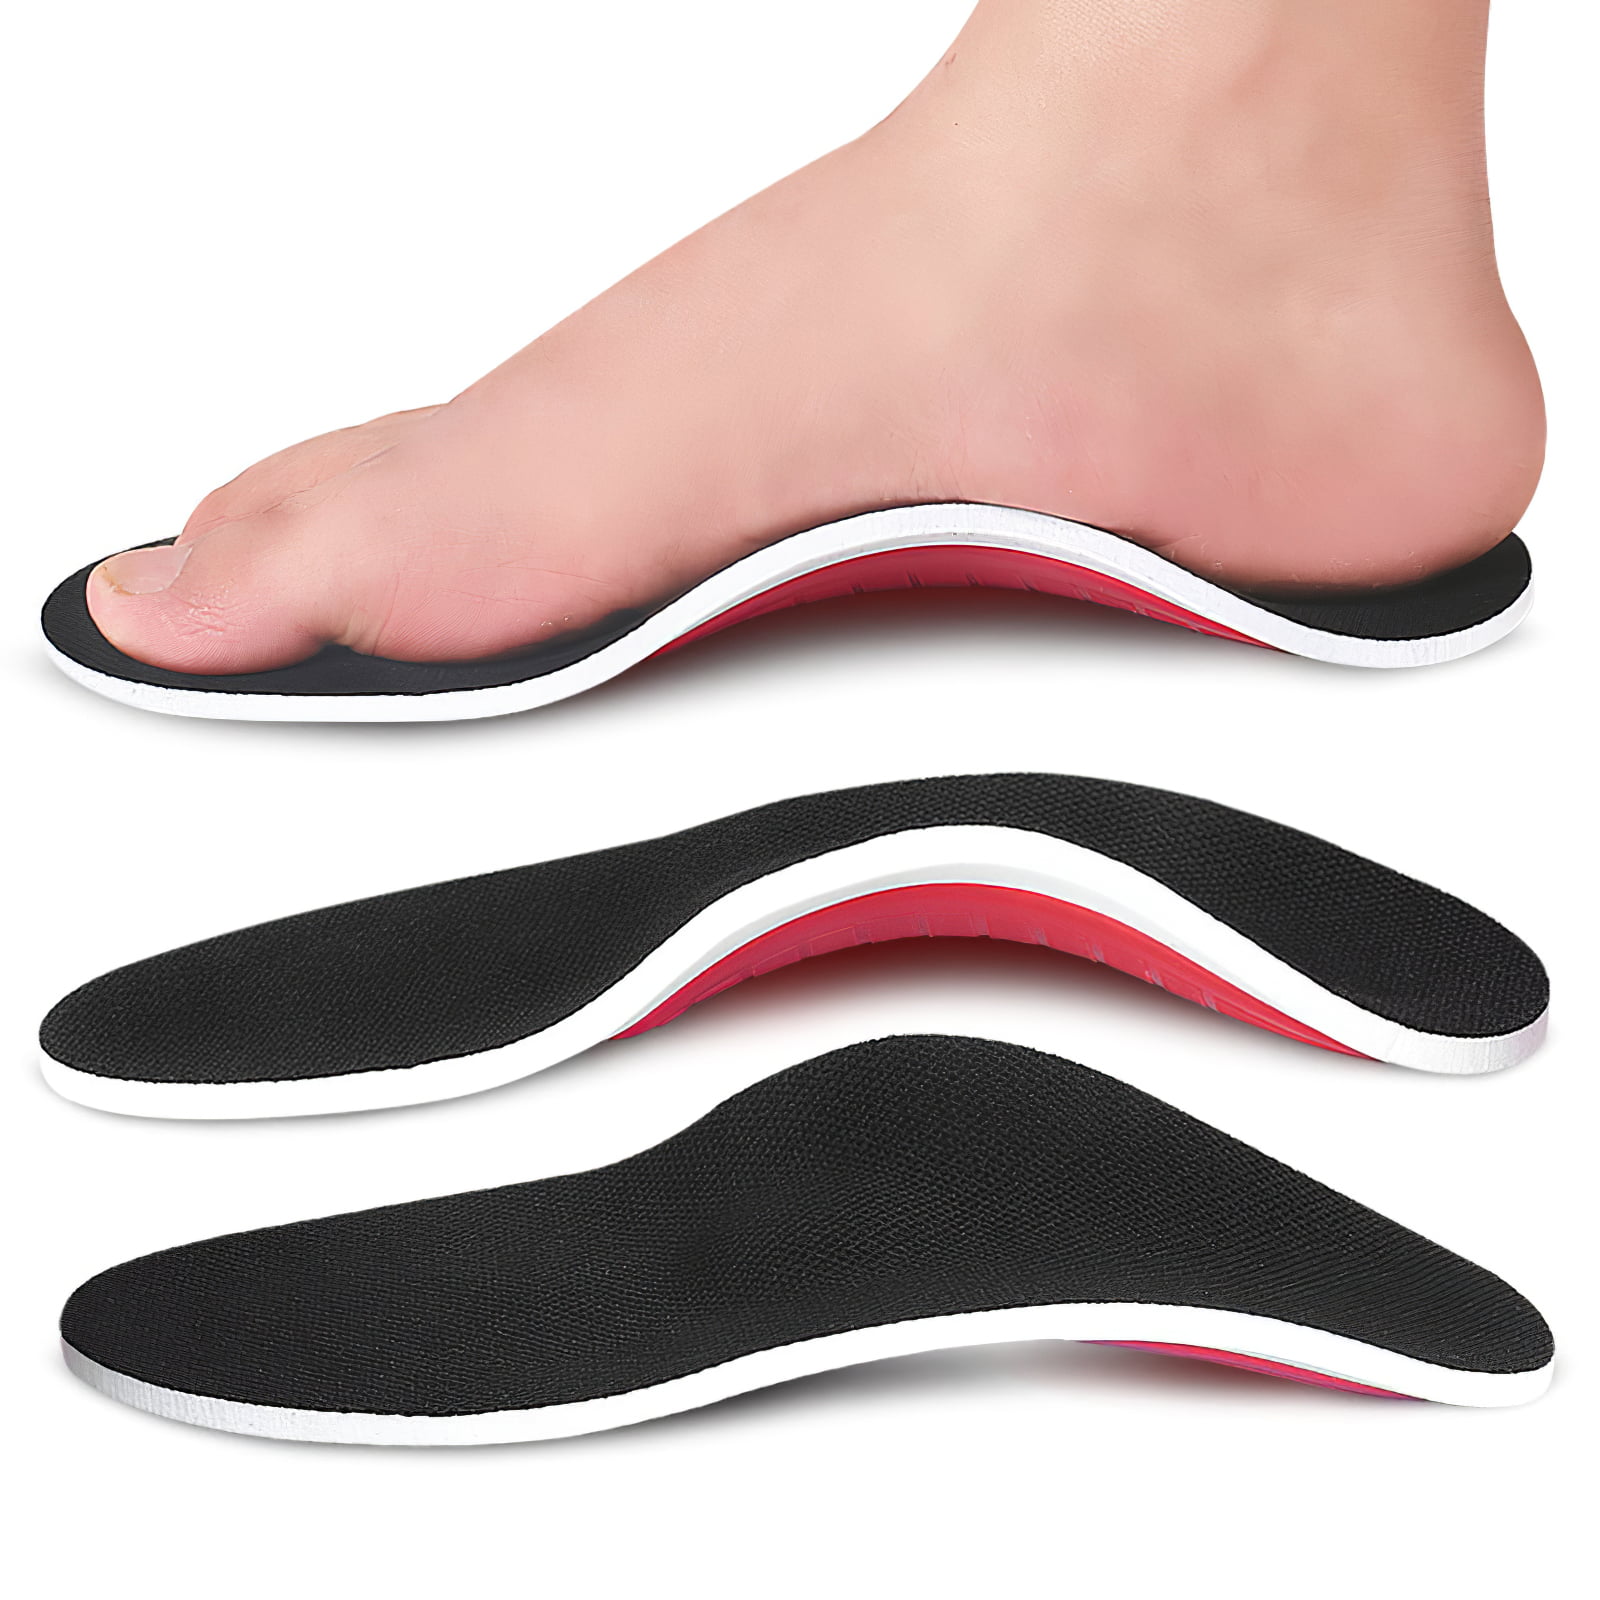 Unisex Orthotic Shoes Functional Insoles Insert High Arch Support Pad New~ 